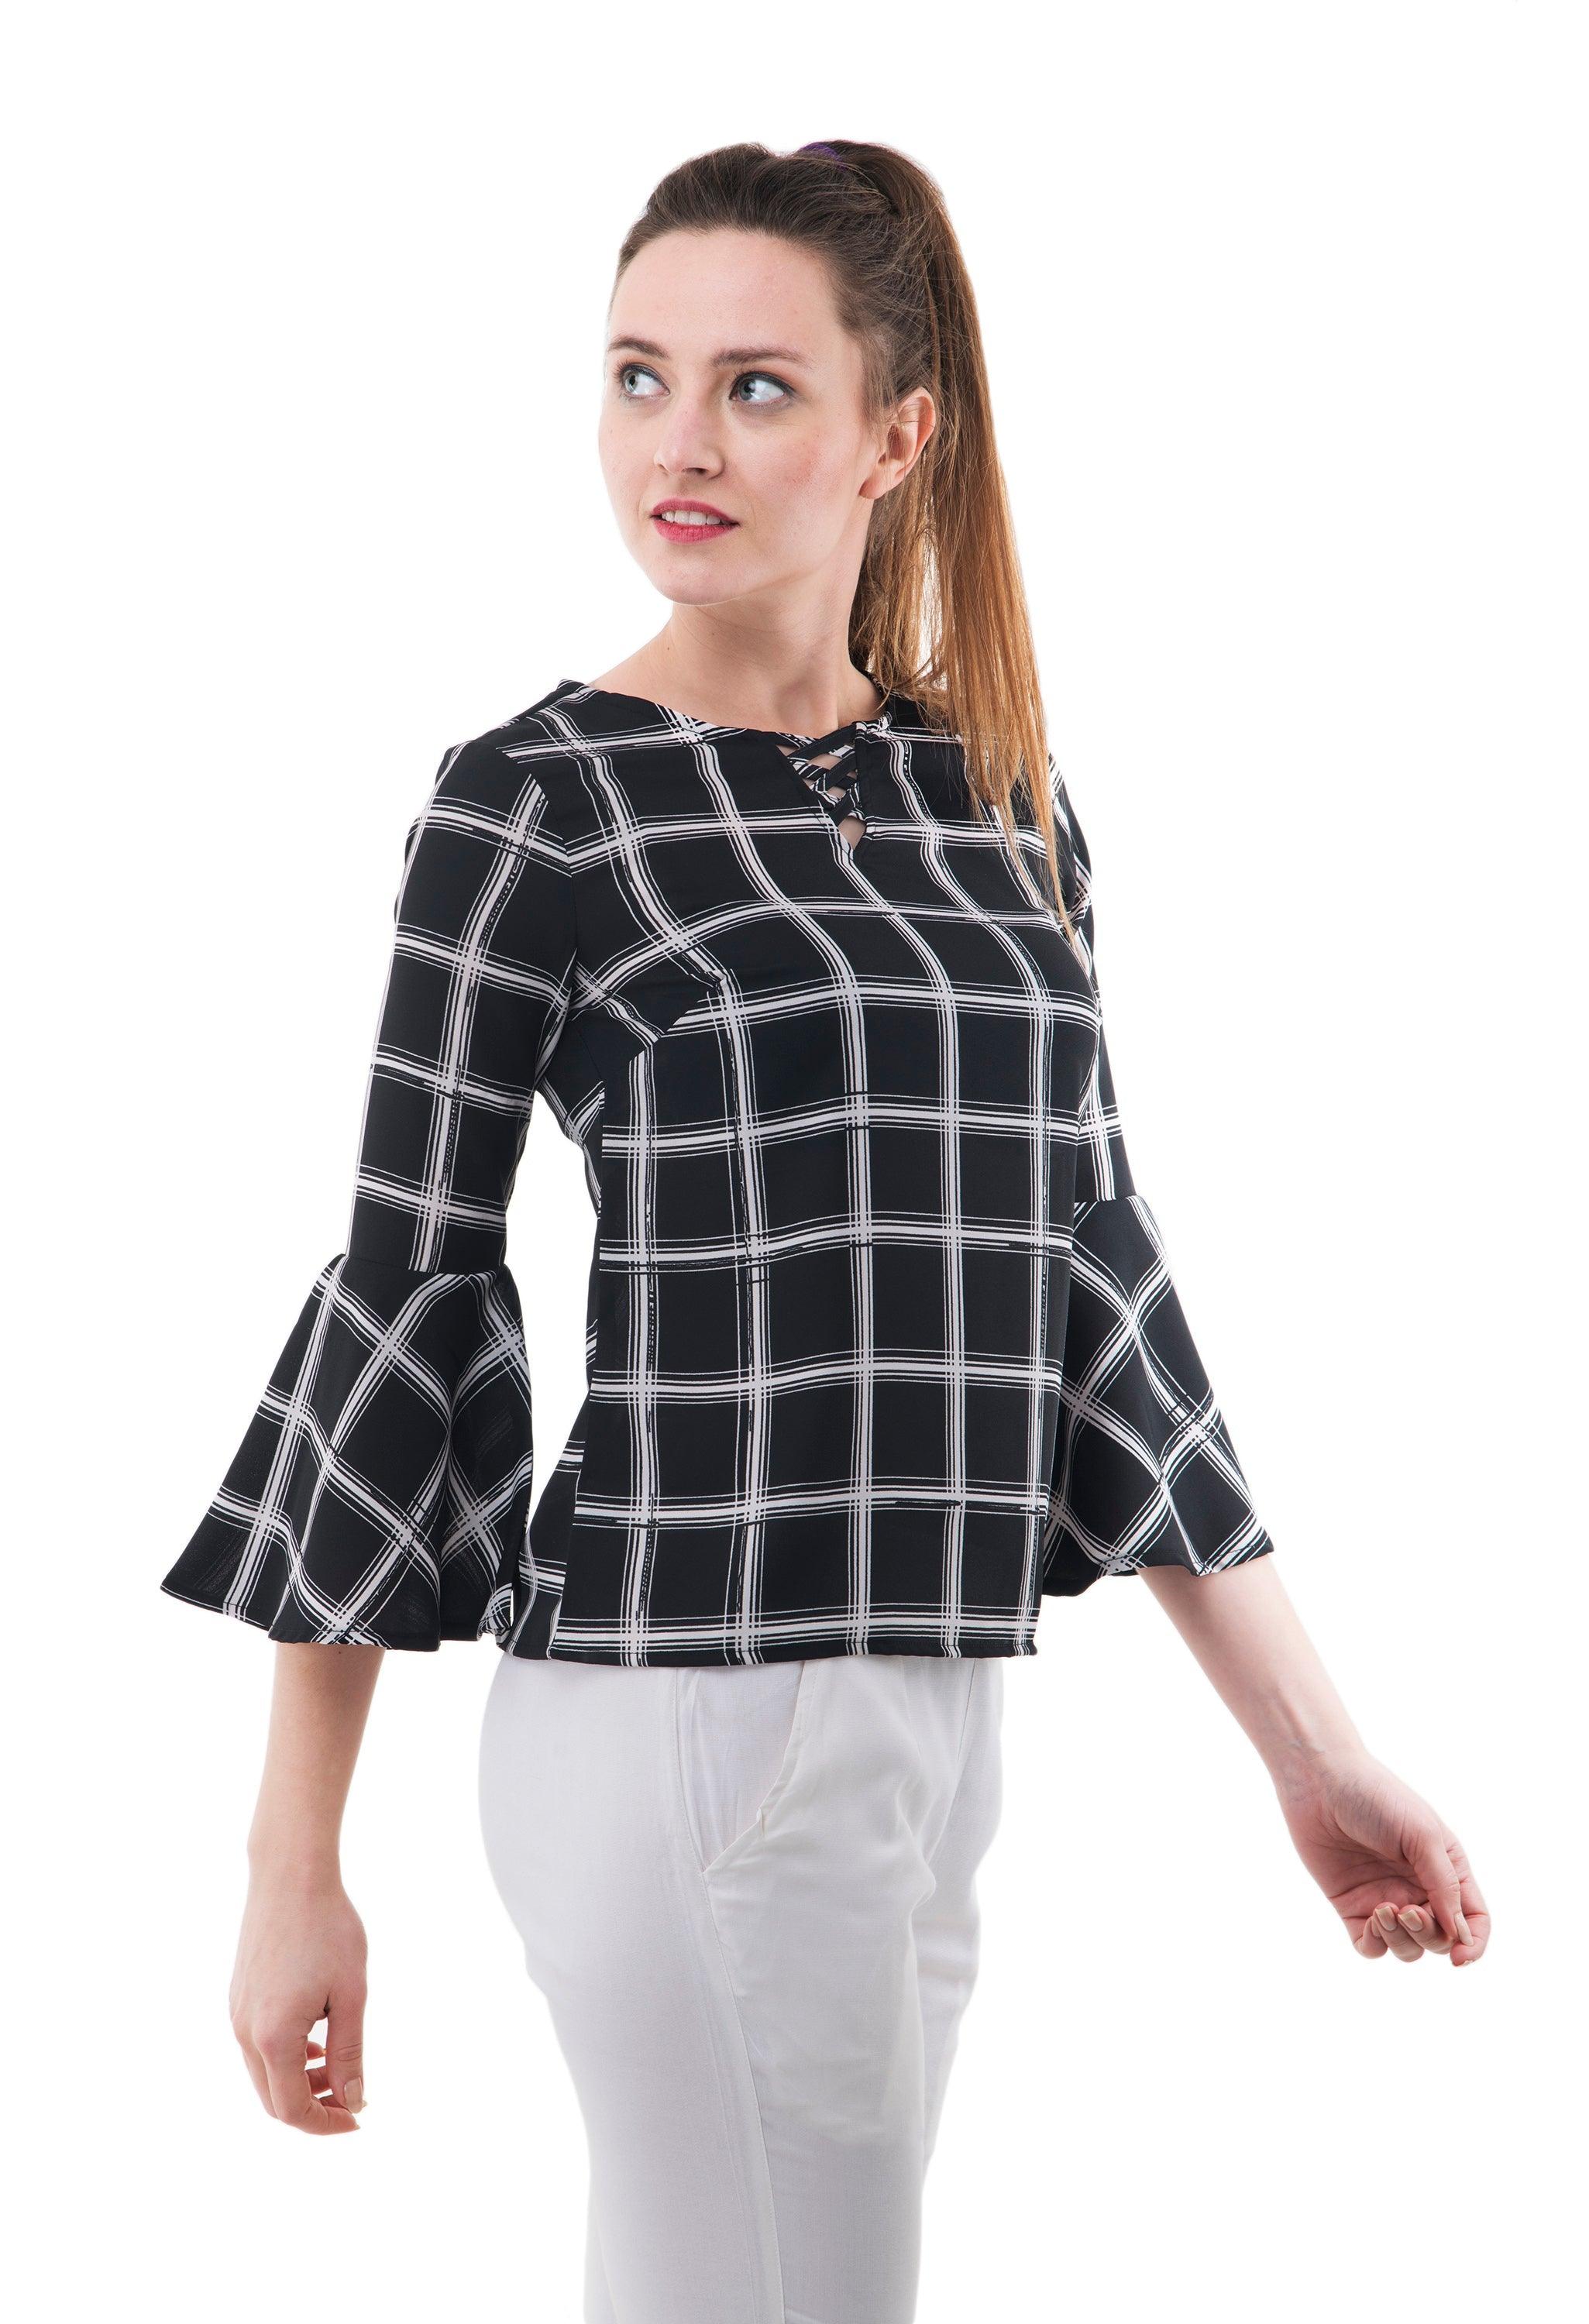 Black Bell Sleeve - Check pattern Top - Znxclothing